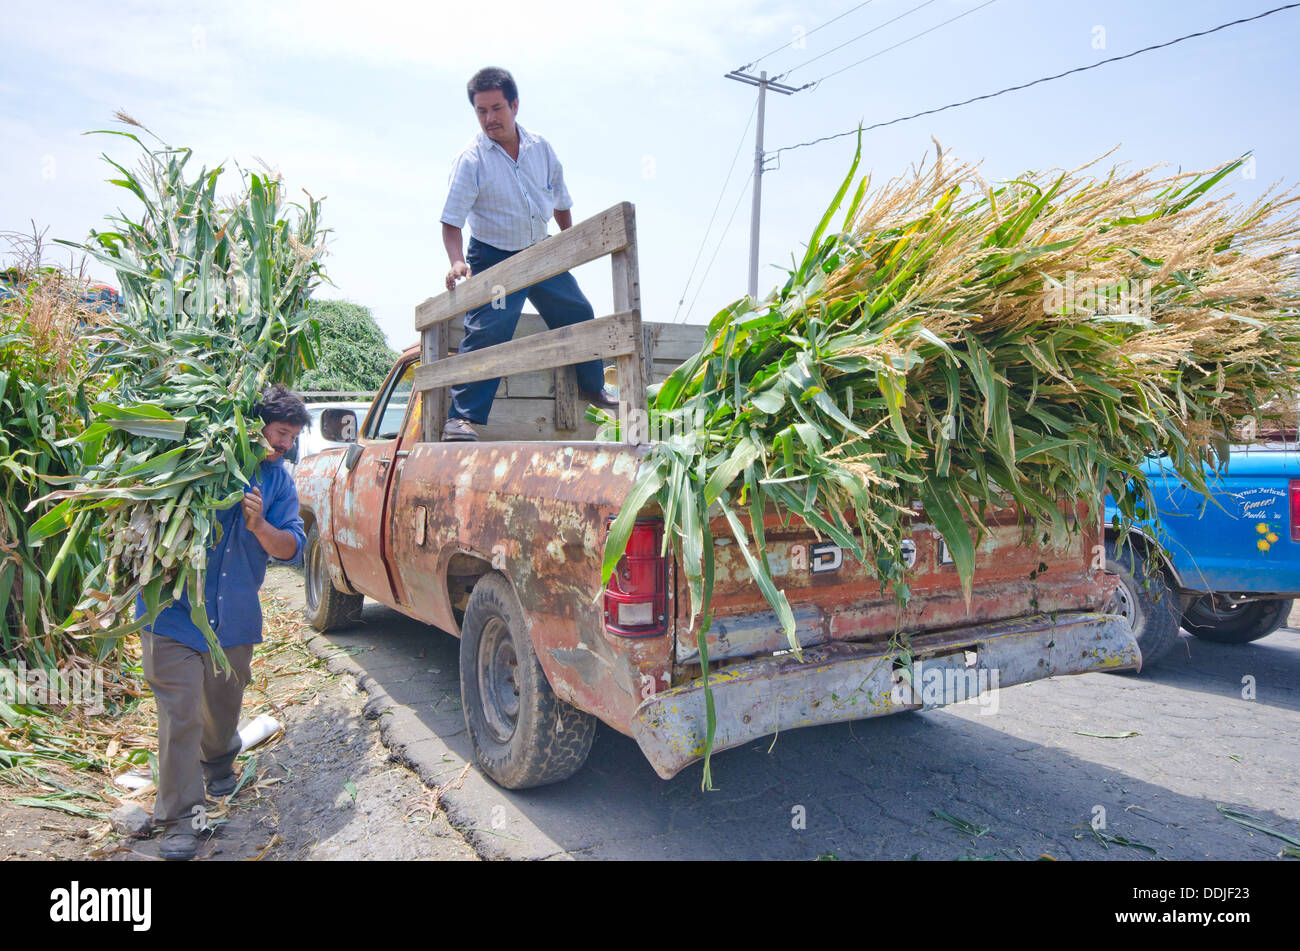 Men lifting animal feed or 'forraje' into the back of an old pickup truck on market day in Mexico. Stock Photo